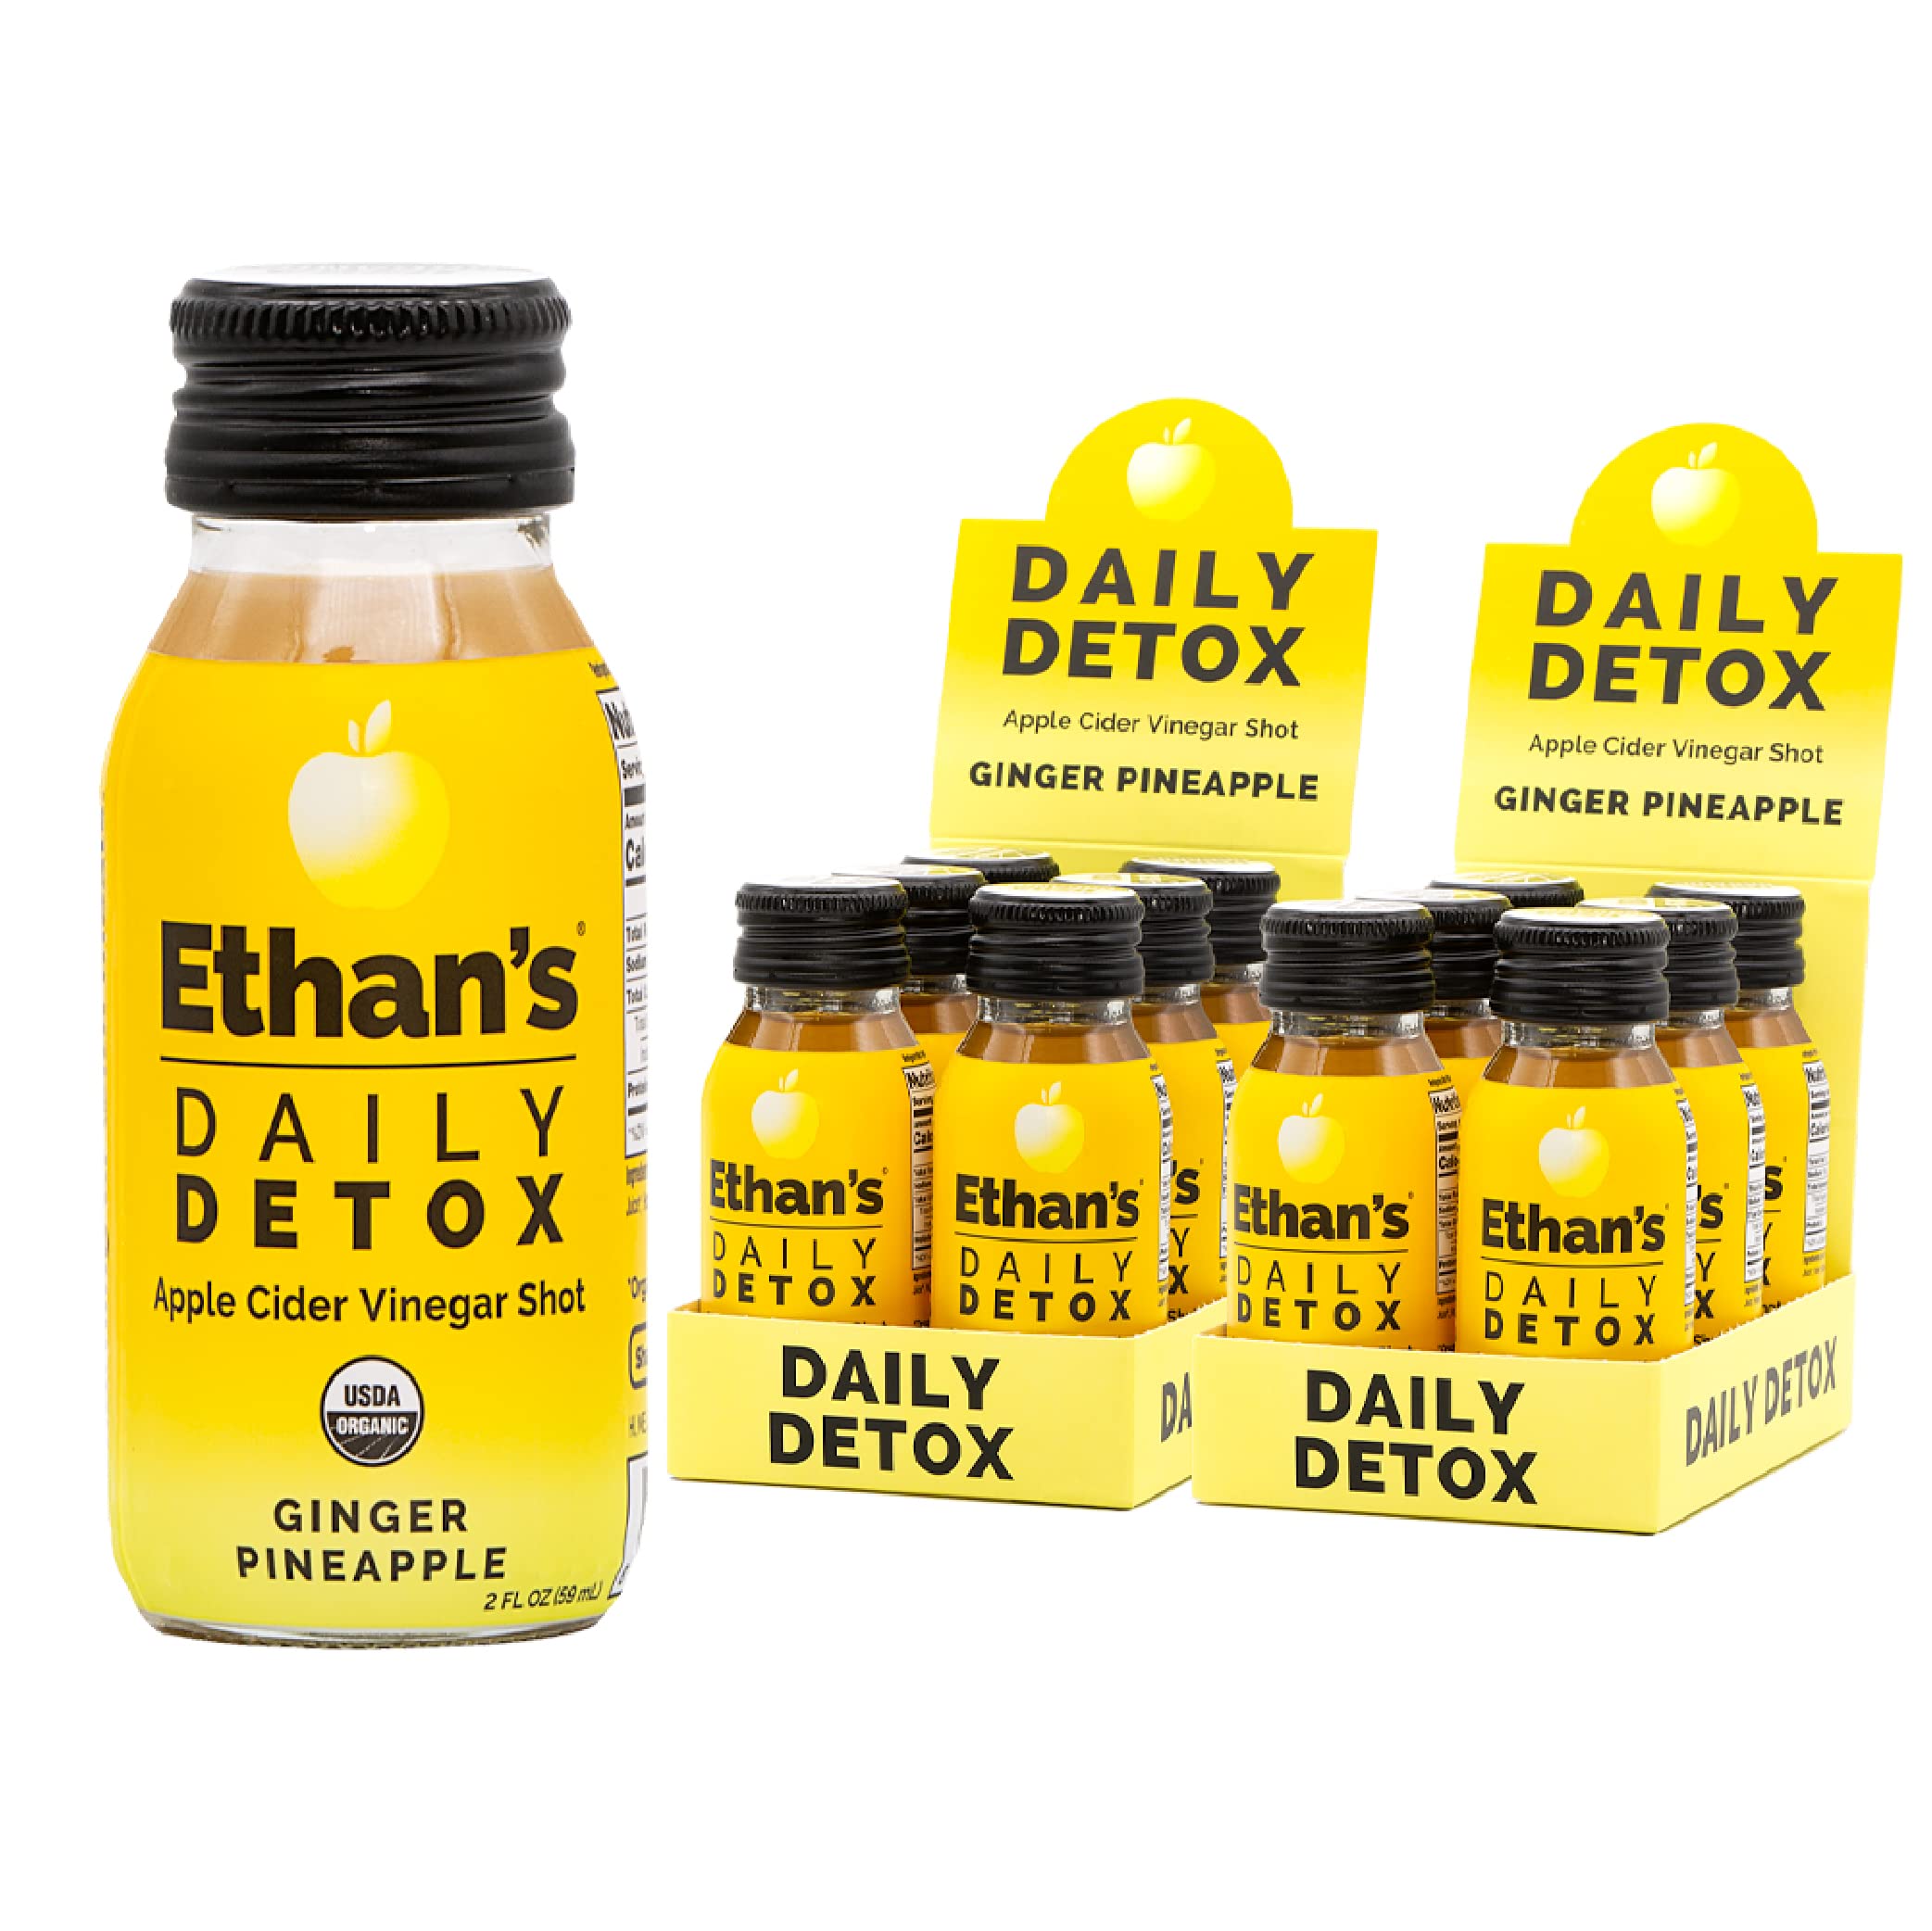 Ethan's Daily Detox Shot, Ginger Pineapple Flavor, ACV Organic Apple Cider Vinegar Shots, Natural Body Juice Cleanse, Digestion Support, Gluten Free (12 Pack of 2oz Shots)